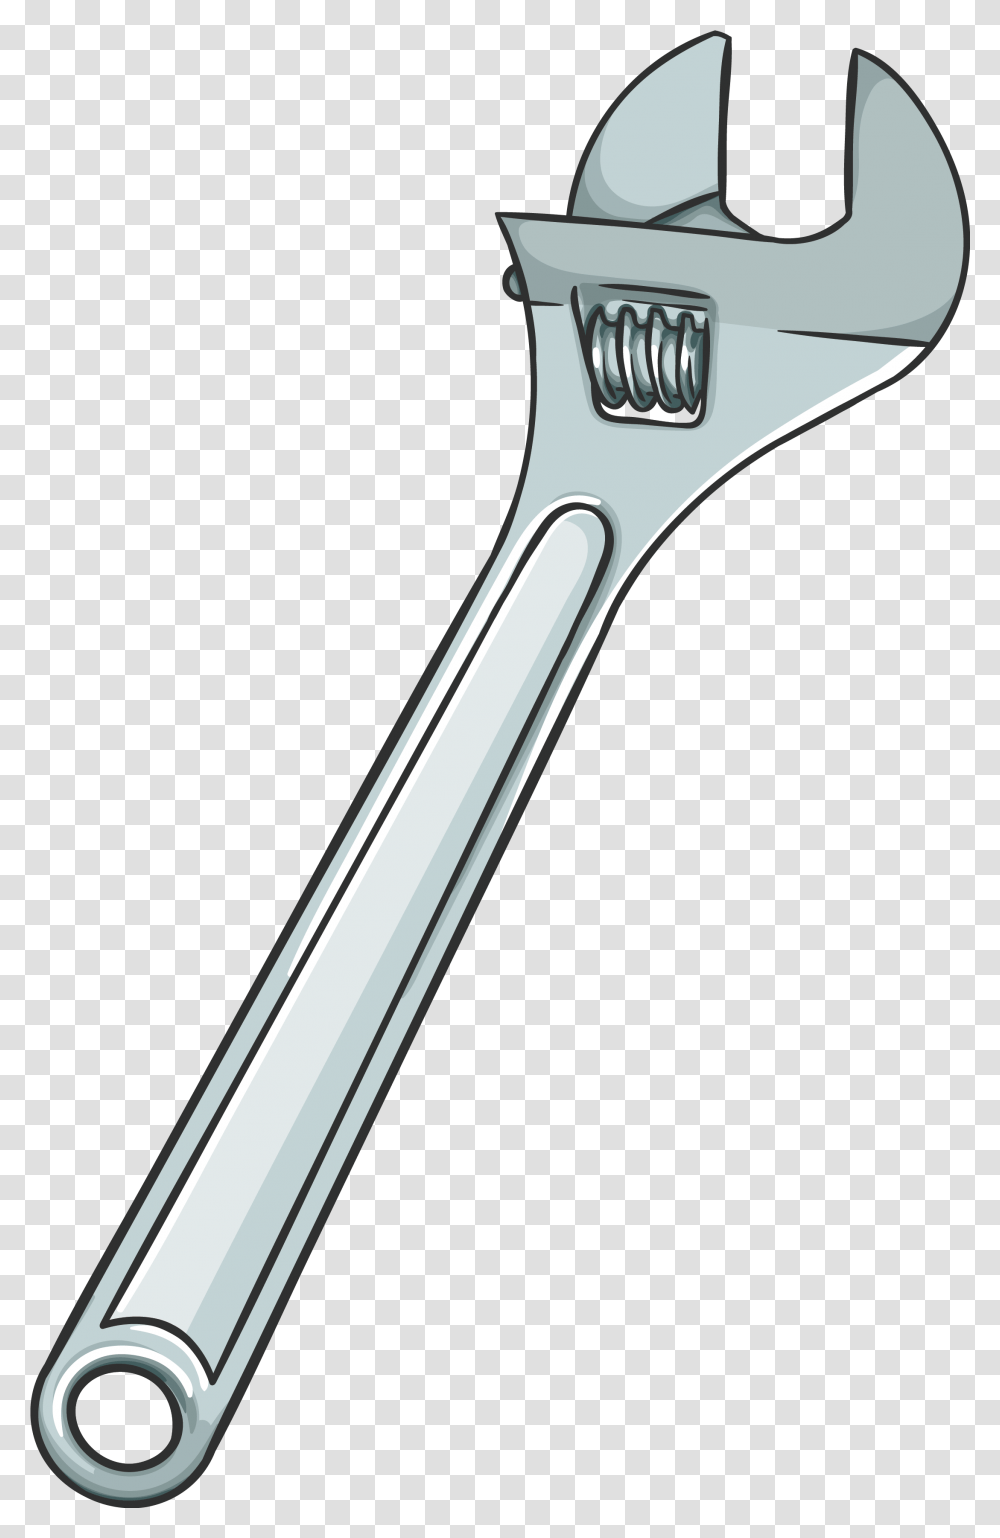 Adjustable Spanner Wrench Download Wrench Background, Sword, Blade, Weapon, Weaponry Transparent Png